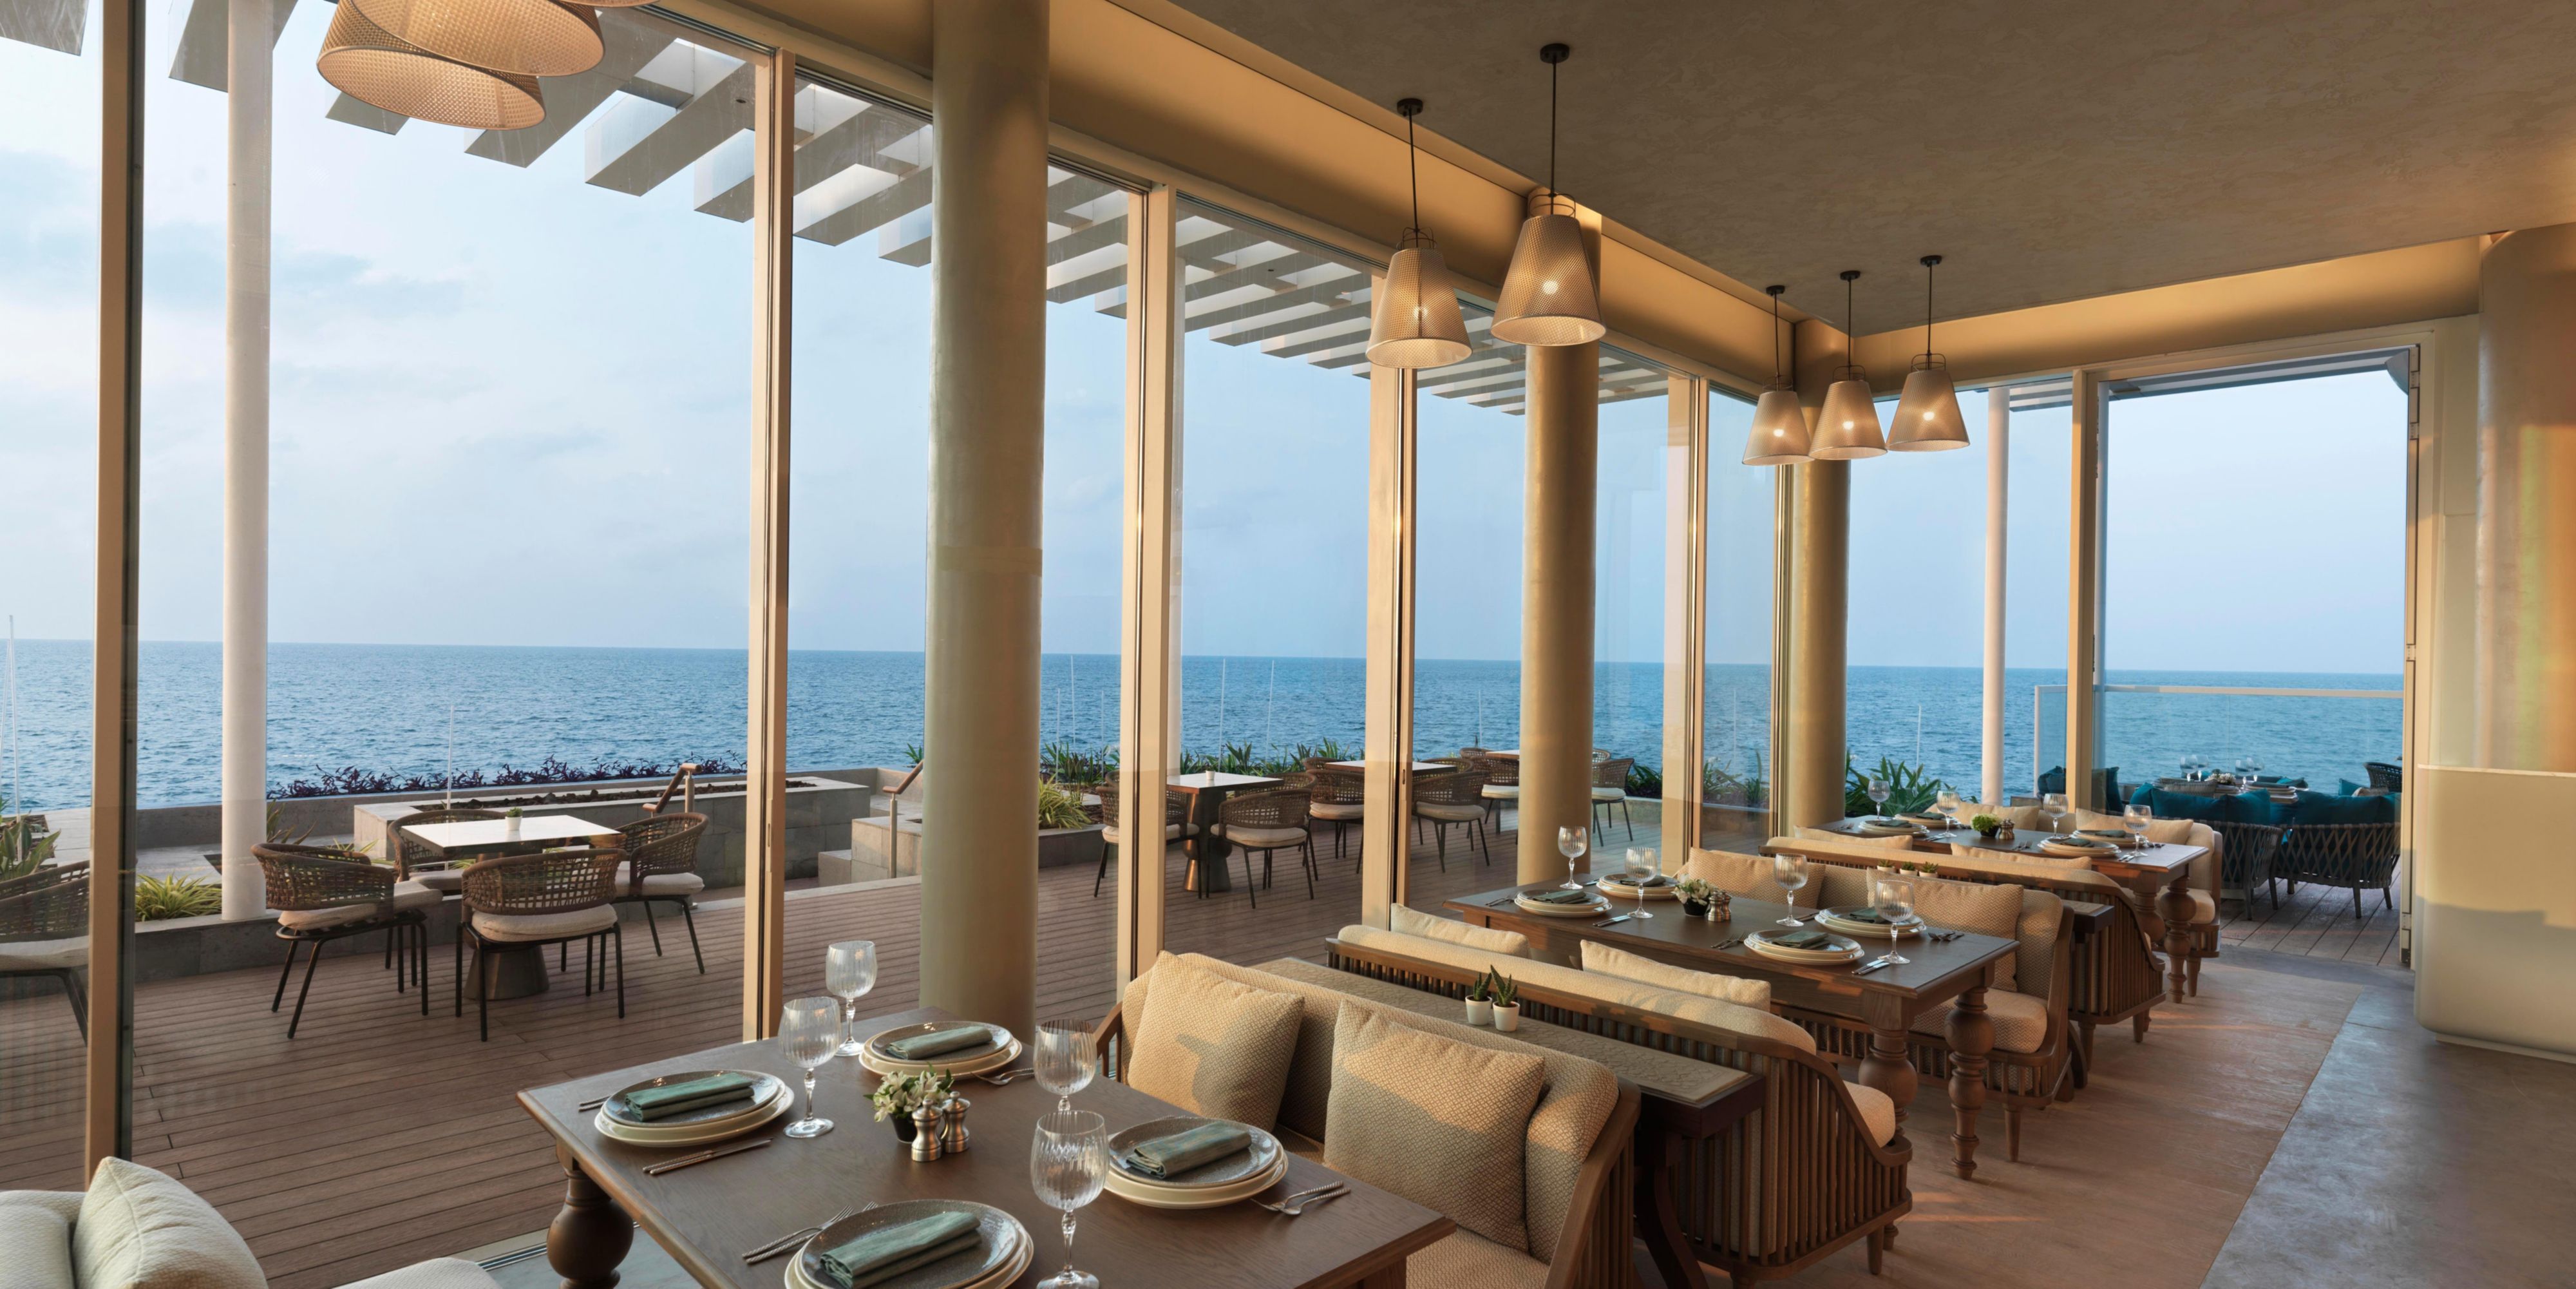 From dinner for two under a starlit sky to dining with 360-degree ocean views, you can indulge in exceptional and one-of-a-kind culinary experiences at one of our six dining destinations.